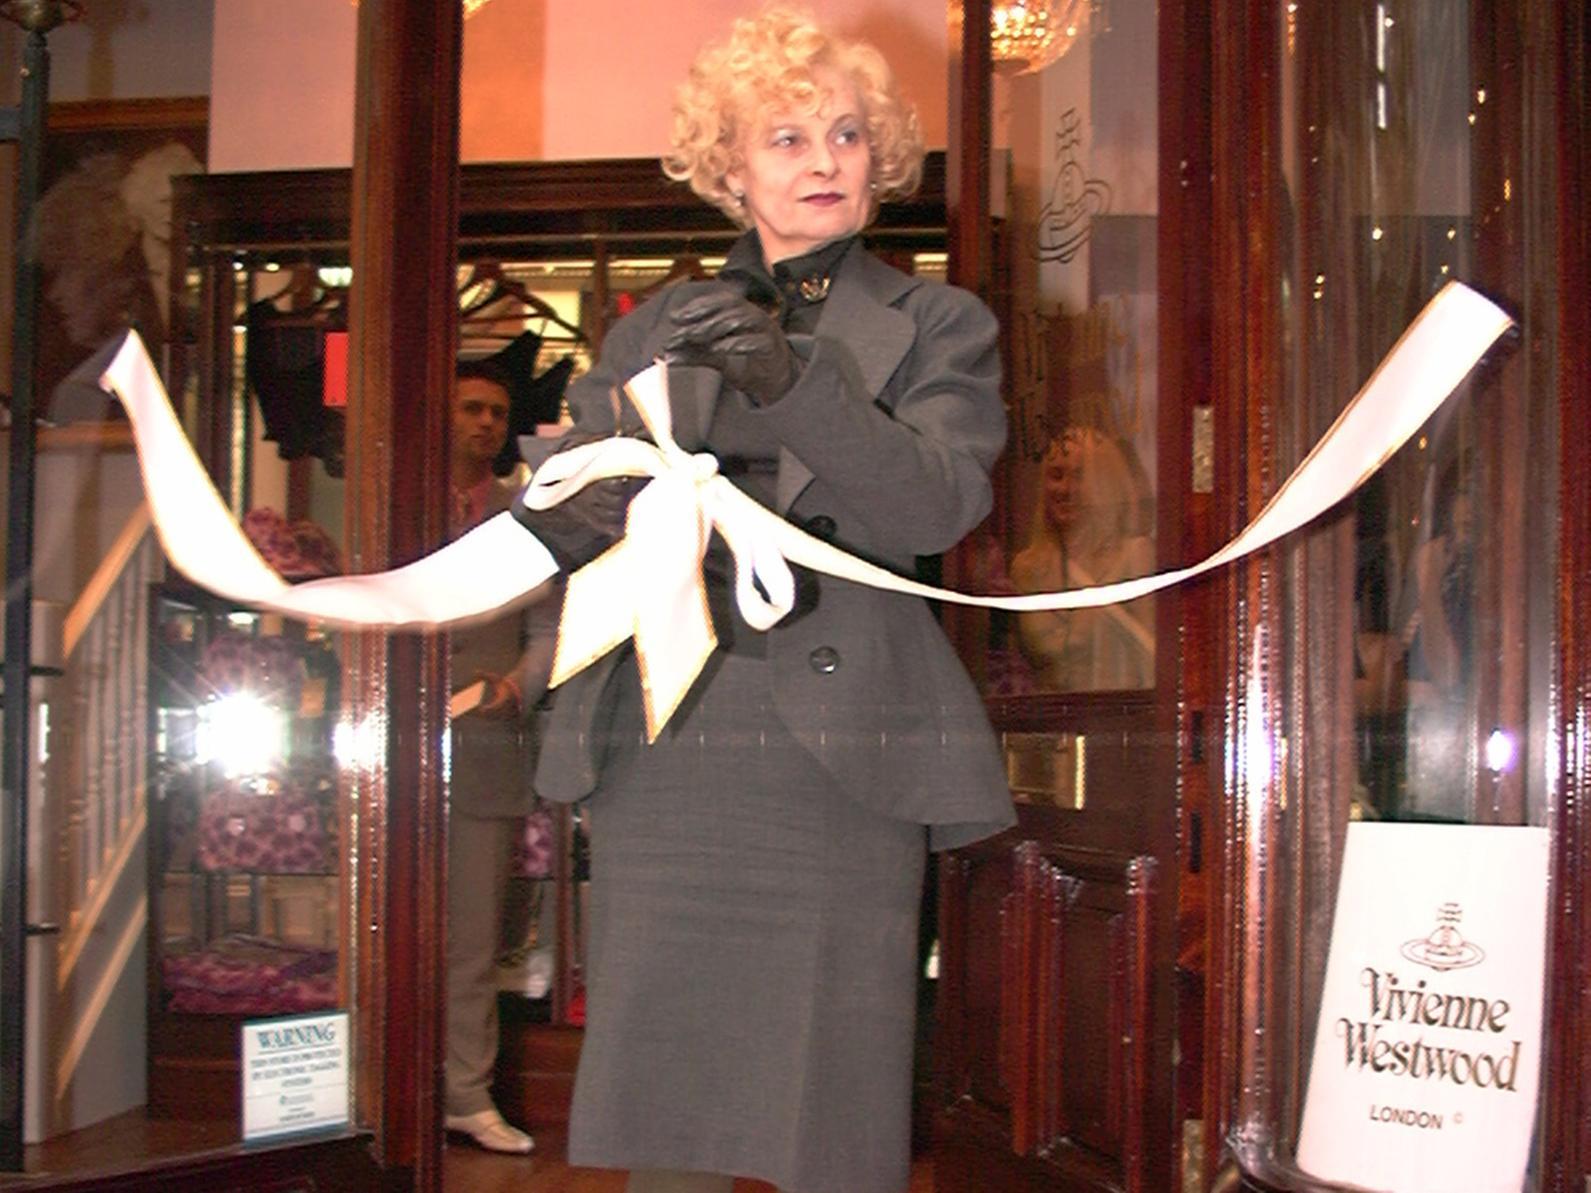 April 1997 and designer Vivienne Westwood was in the city to officially open her new shop in the County Arcade.